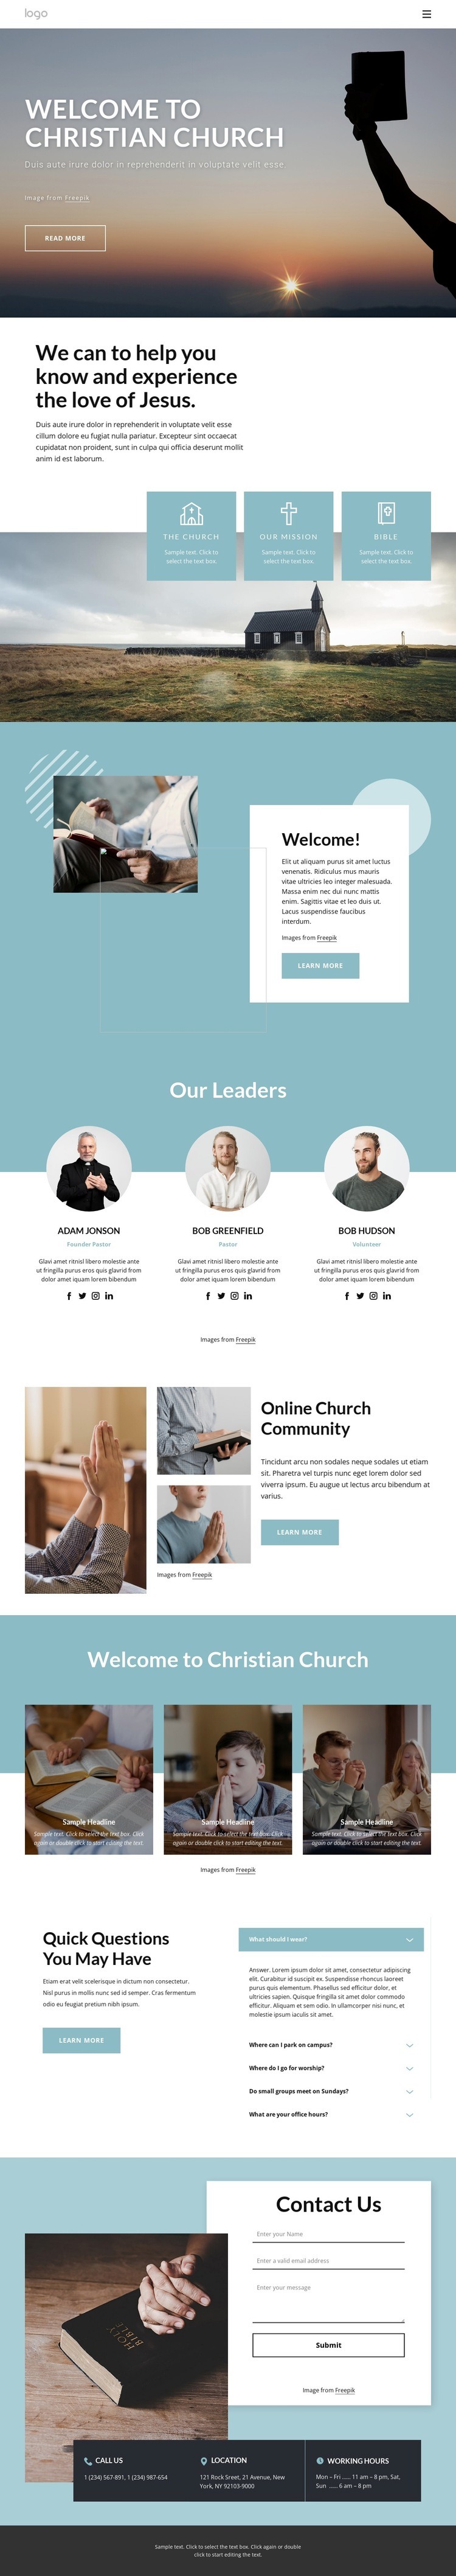 Our Mission, vision and confession Homepage Design